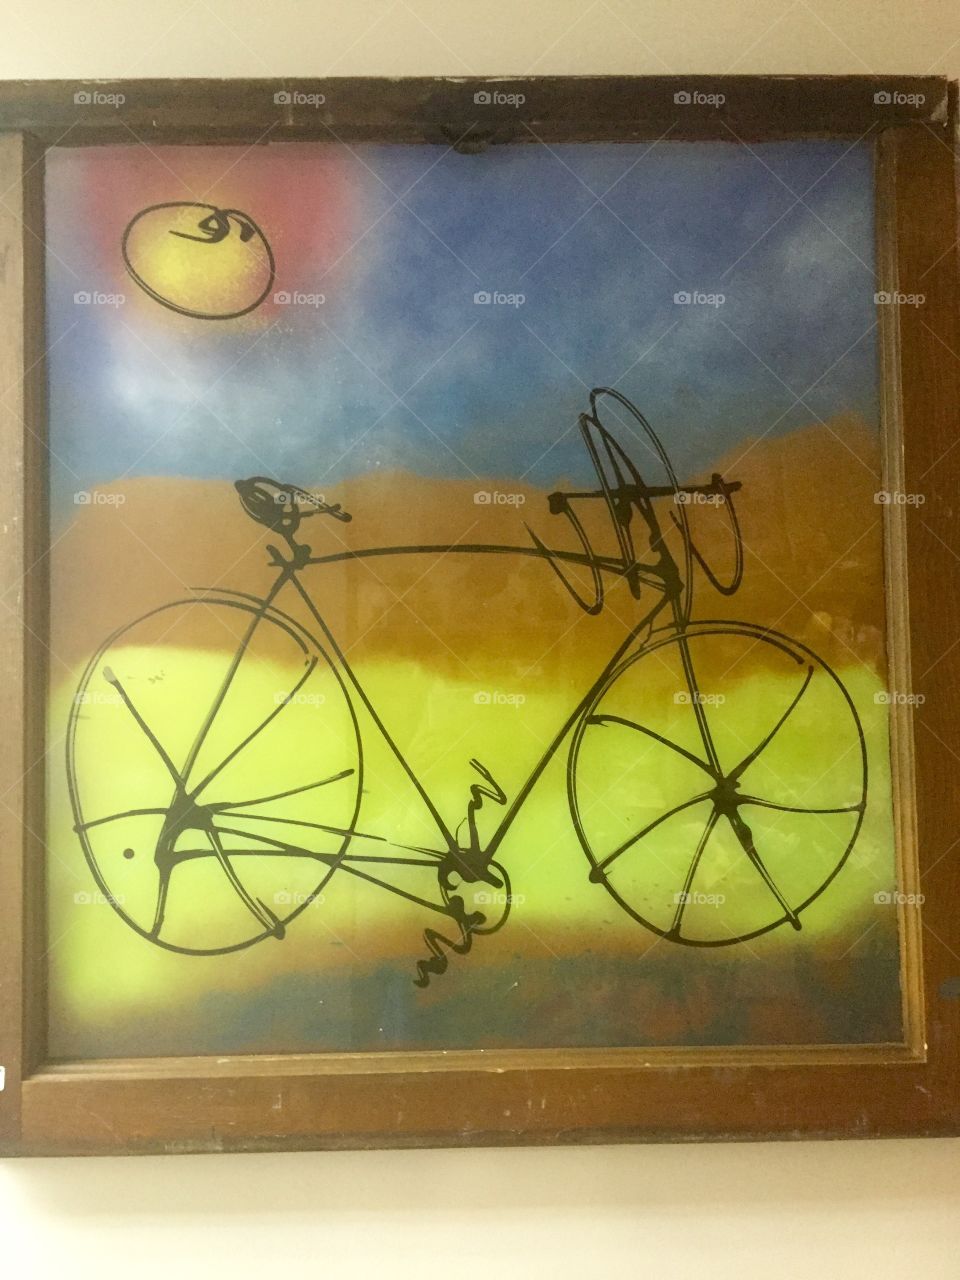 Local art from Old Colorado City. I saw it in a whimsical shop called “Who Gives a Scrap” where everything is repurposed. I snapped a photo to show my dad who is an amateur cyclist. 